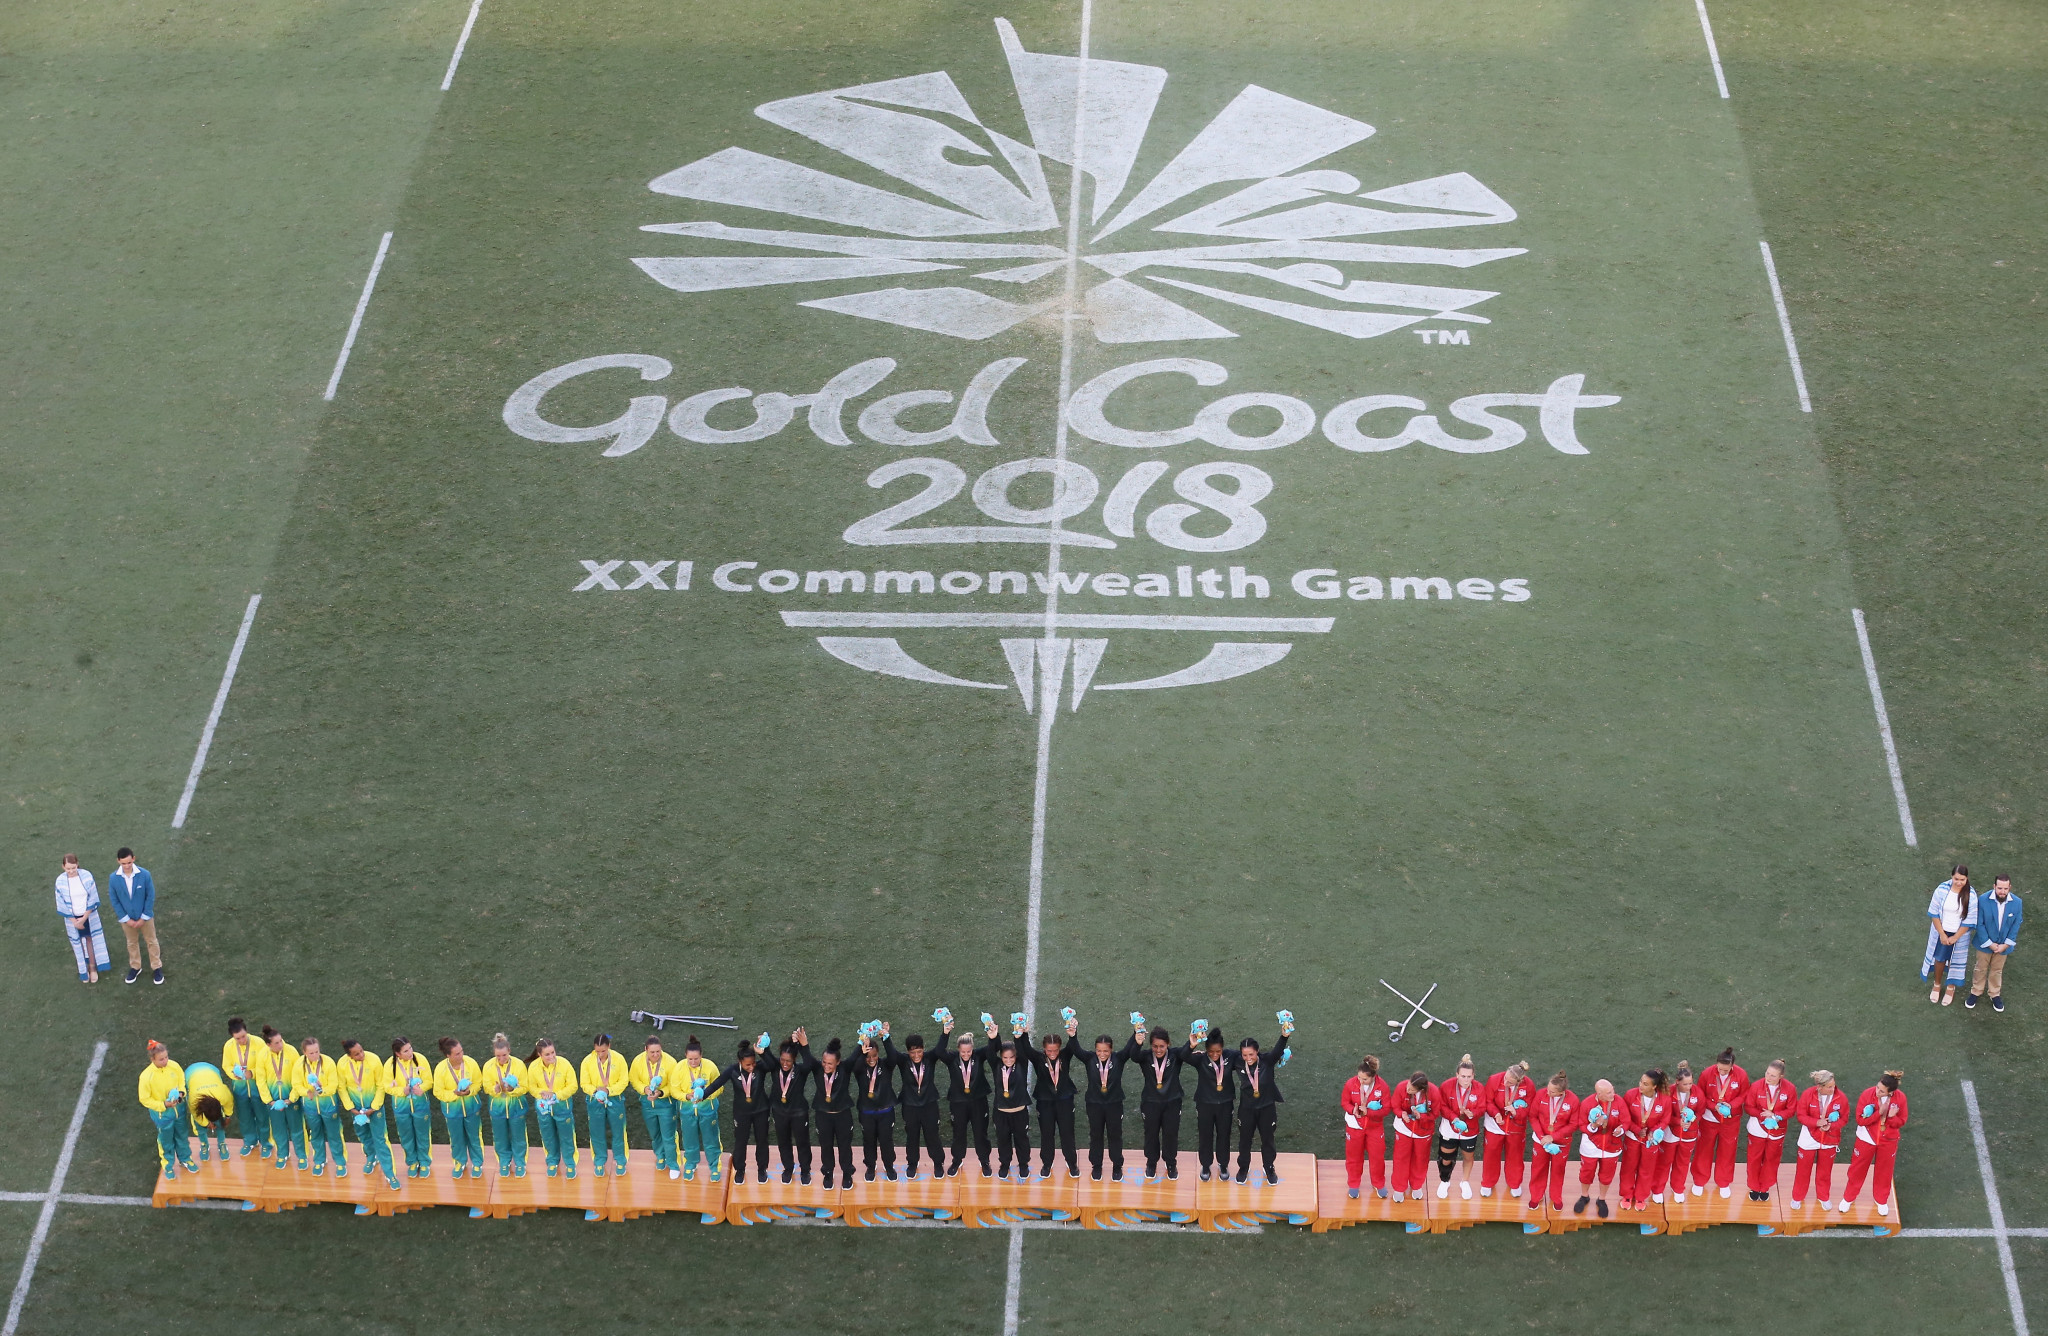 Facilities used at the Gold Coast 2018 Commonwealth Games are expected to be included in a Queensland Olympic bid ©Getty Images